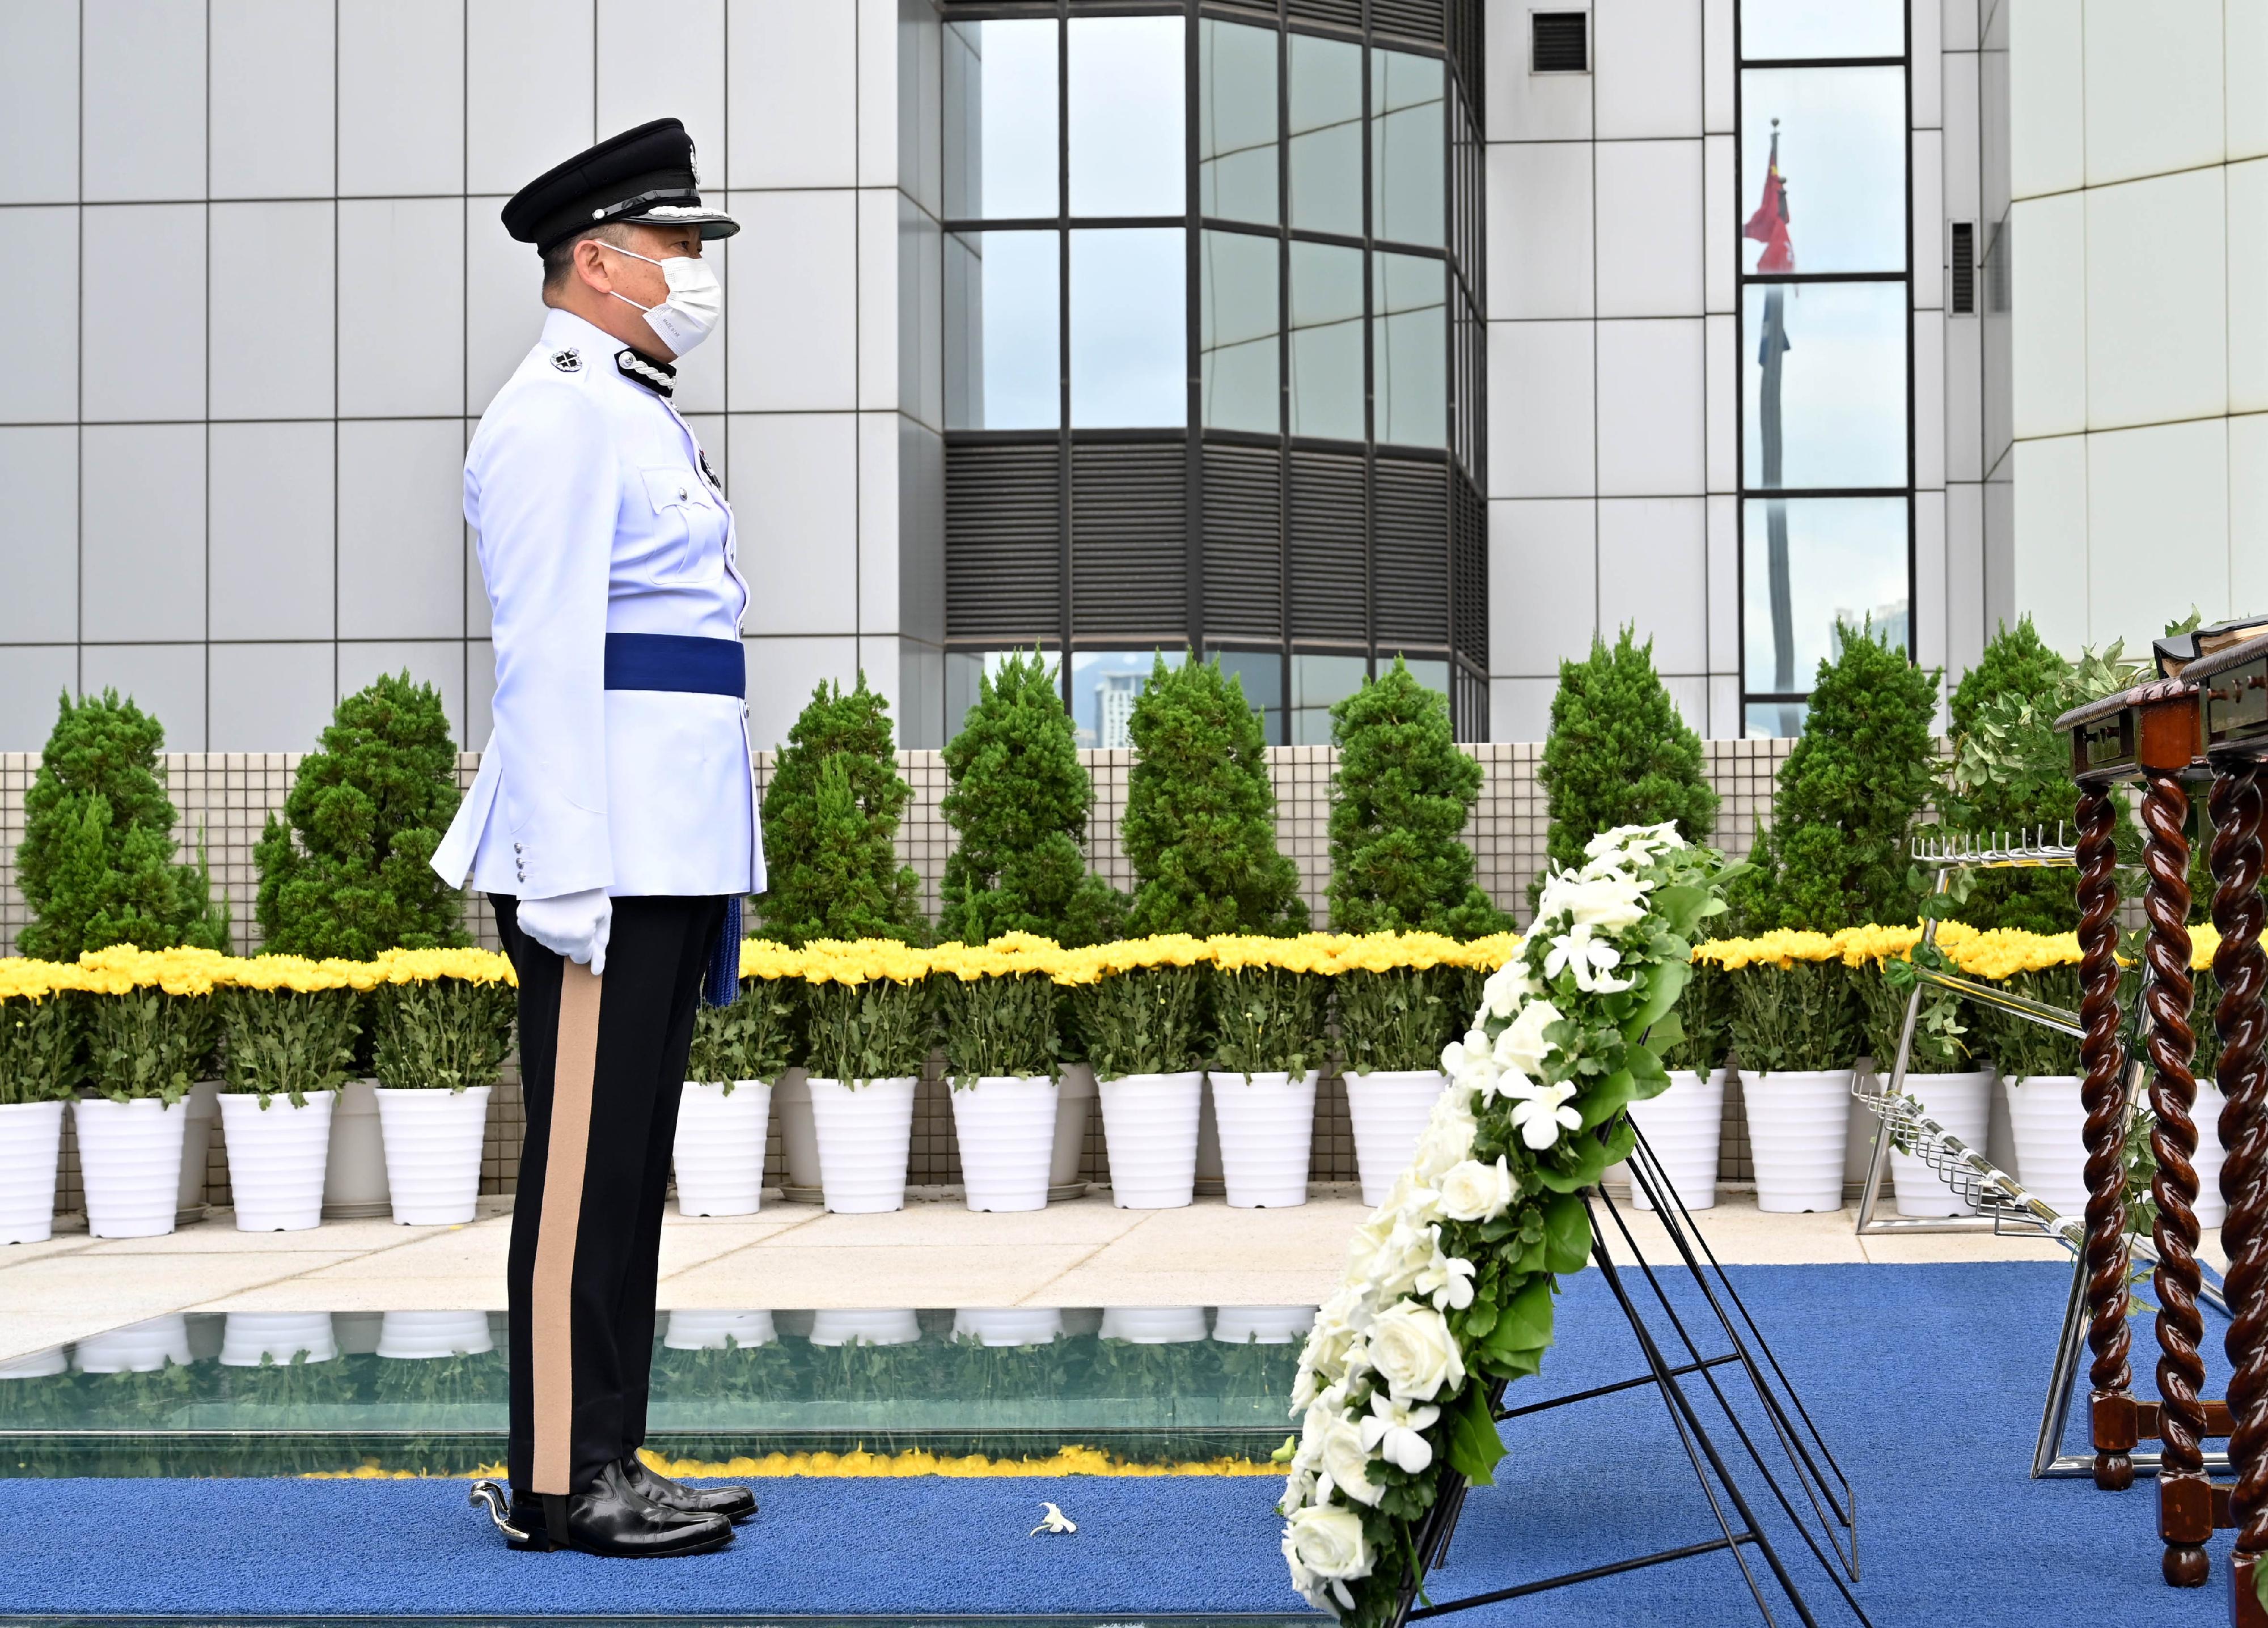 The Hong Kong Police Force holds a ceremony at the Police Headquarters this morning (November 11) to pay tribute to members of the Hong Kong Police Force and Hong Kong Auxiliary Police Force who have given their lives in the line of duty. Photo shows the Commandant of the Hong Kong Auxiliary Police Force, Mr Yang Joe-tsi, paying tribute in front of the Books of Remembrance in which the names of the fallen are inscribed.